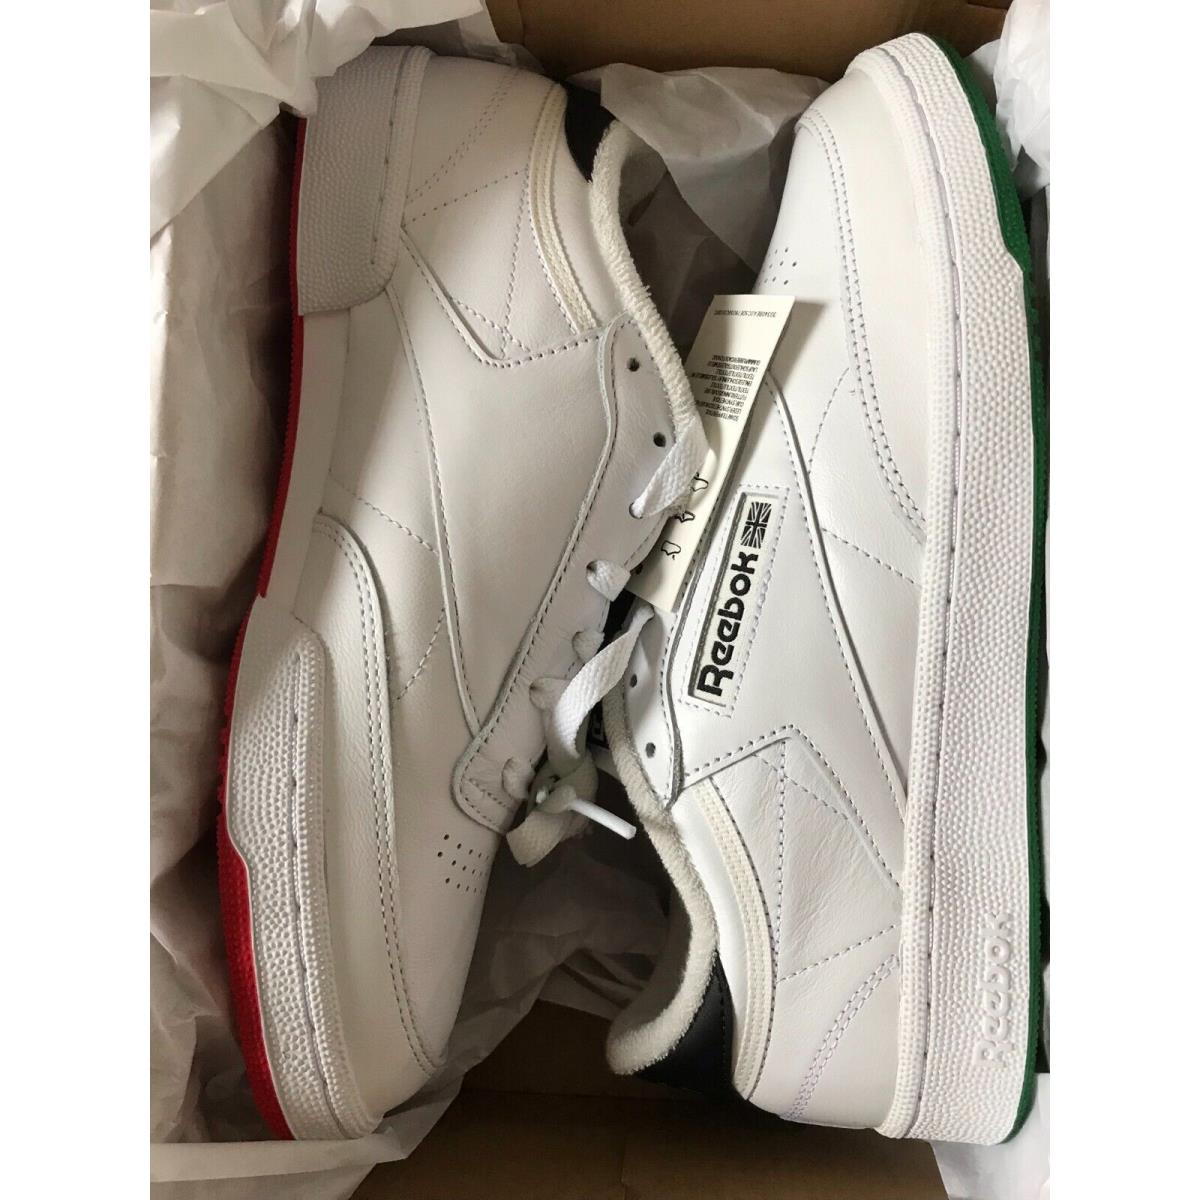 Reebok shoes  - Footwear White / Chalk White / Vector Red / Green 7